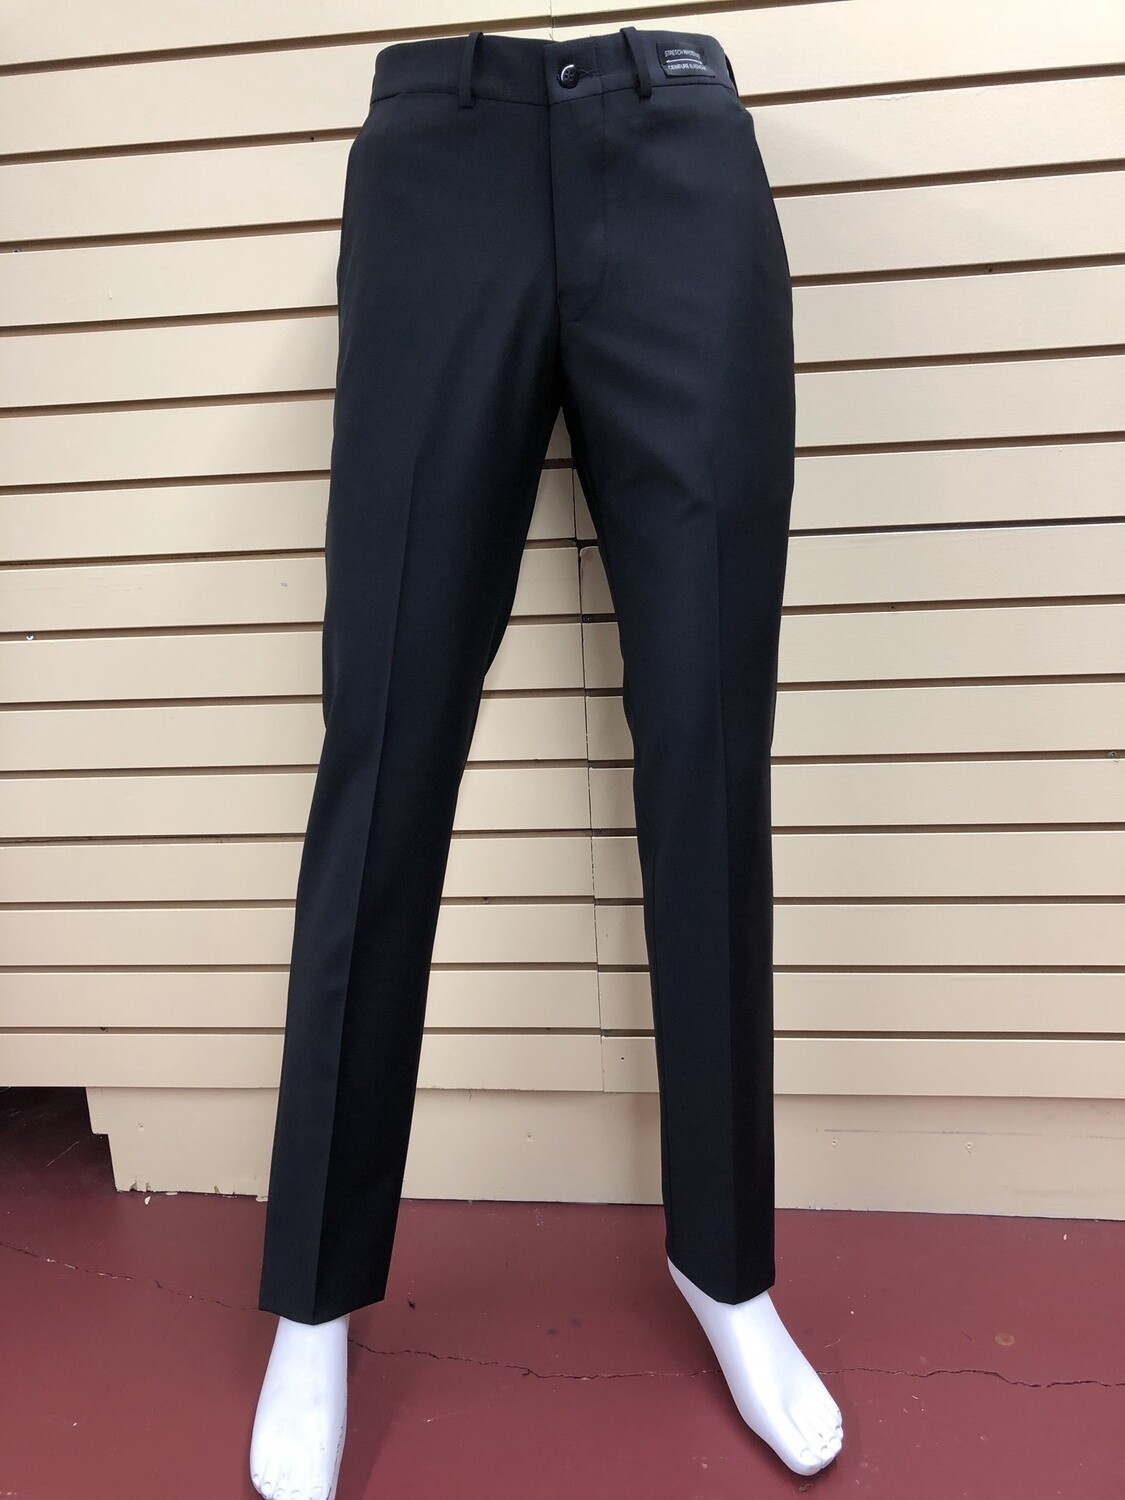 V15 Black Dress Pant Washable Made In Canada